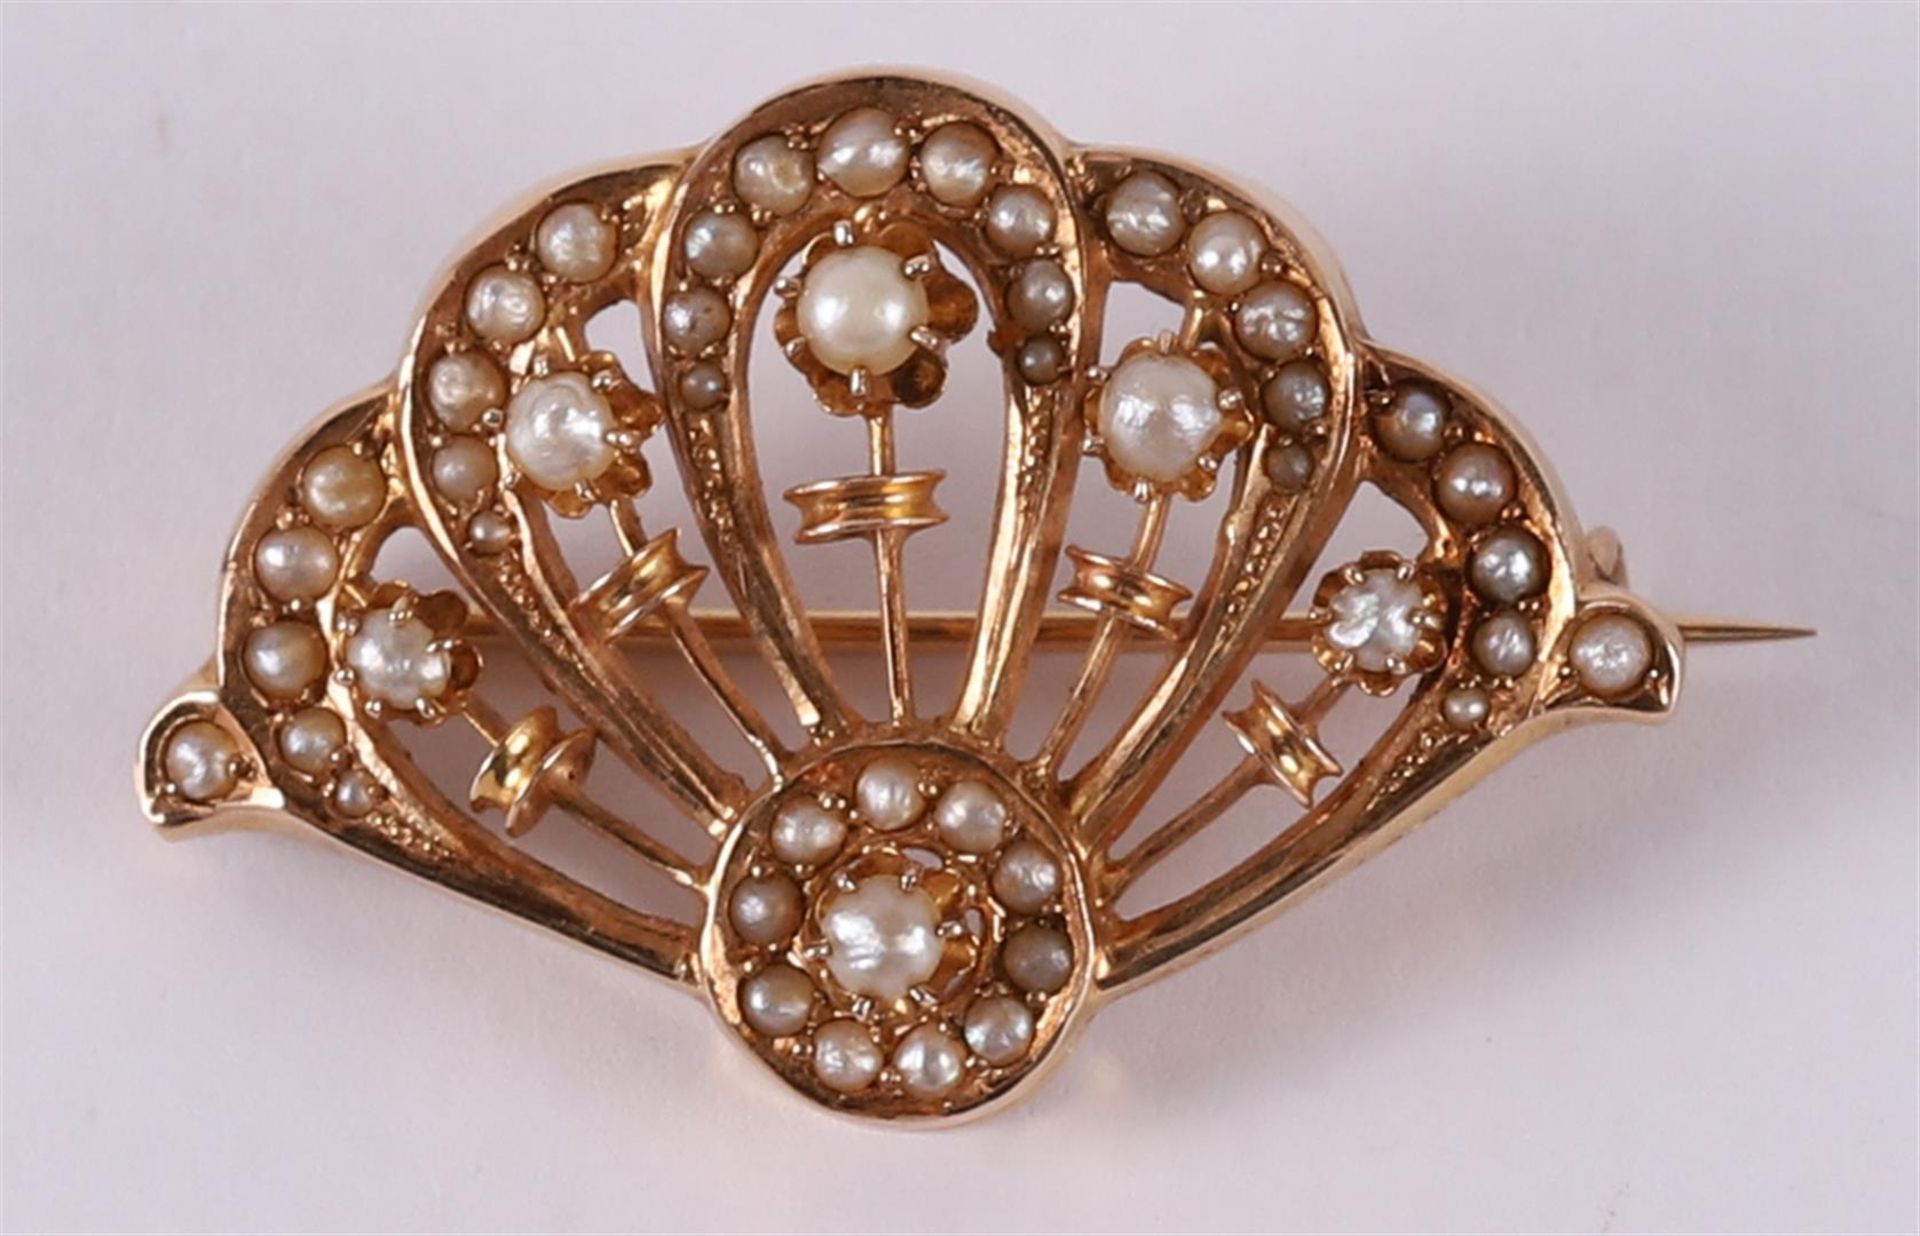 A 14 kt 585/1000 gold brooch with many pearls, 19th century.